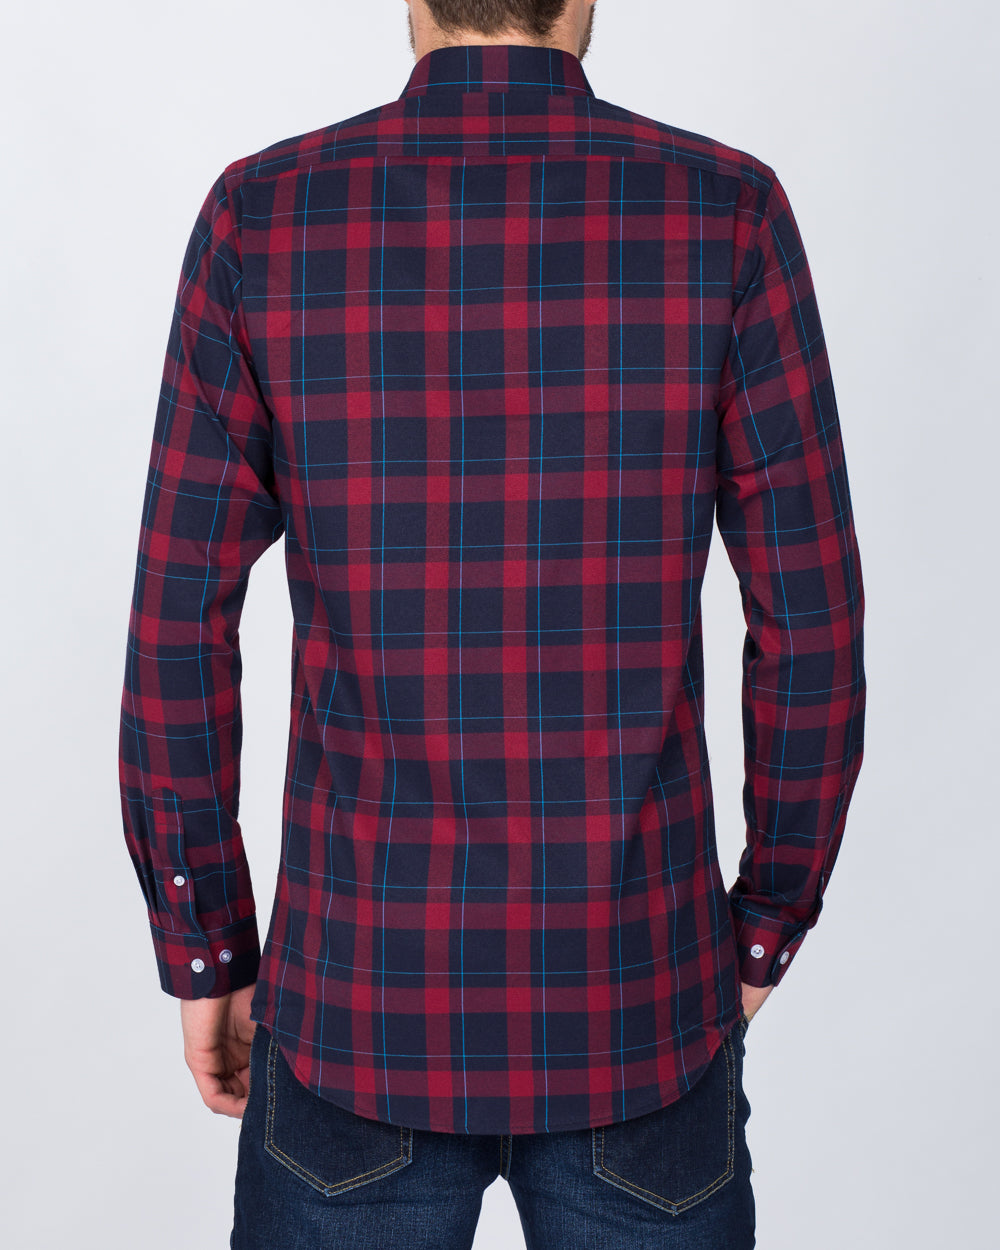 2t Slim Fit Long Sleeve Tall Shirt (red/navy)